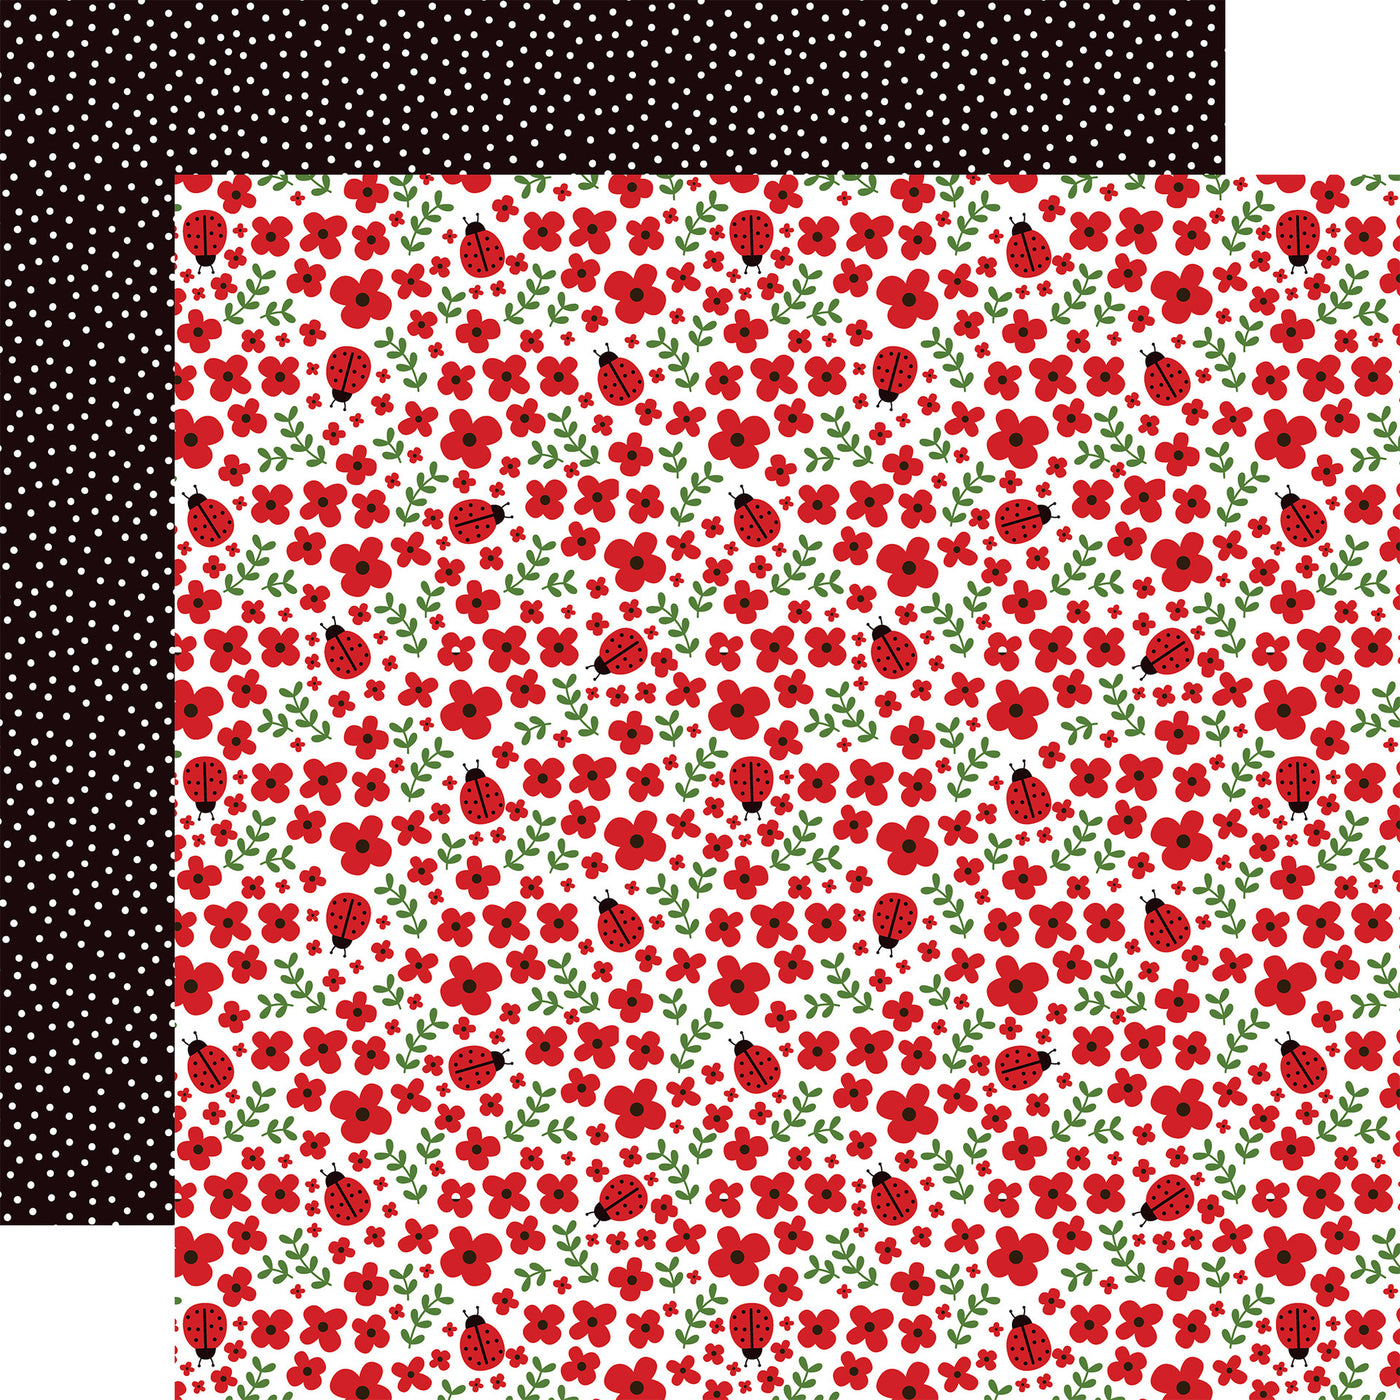 12x12 double-sided patterned paper. (Side A - red ladybugs and flowers on a white background; Side B - white polka dots all over a black background)